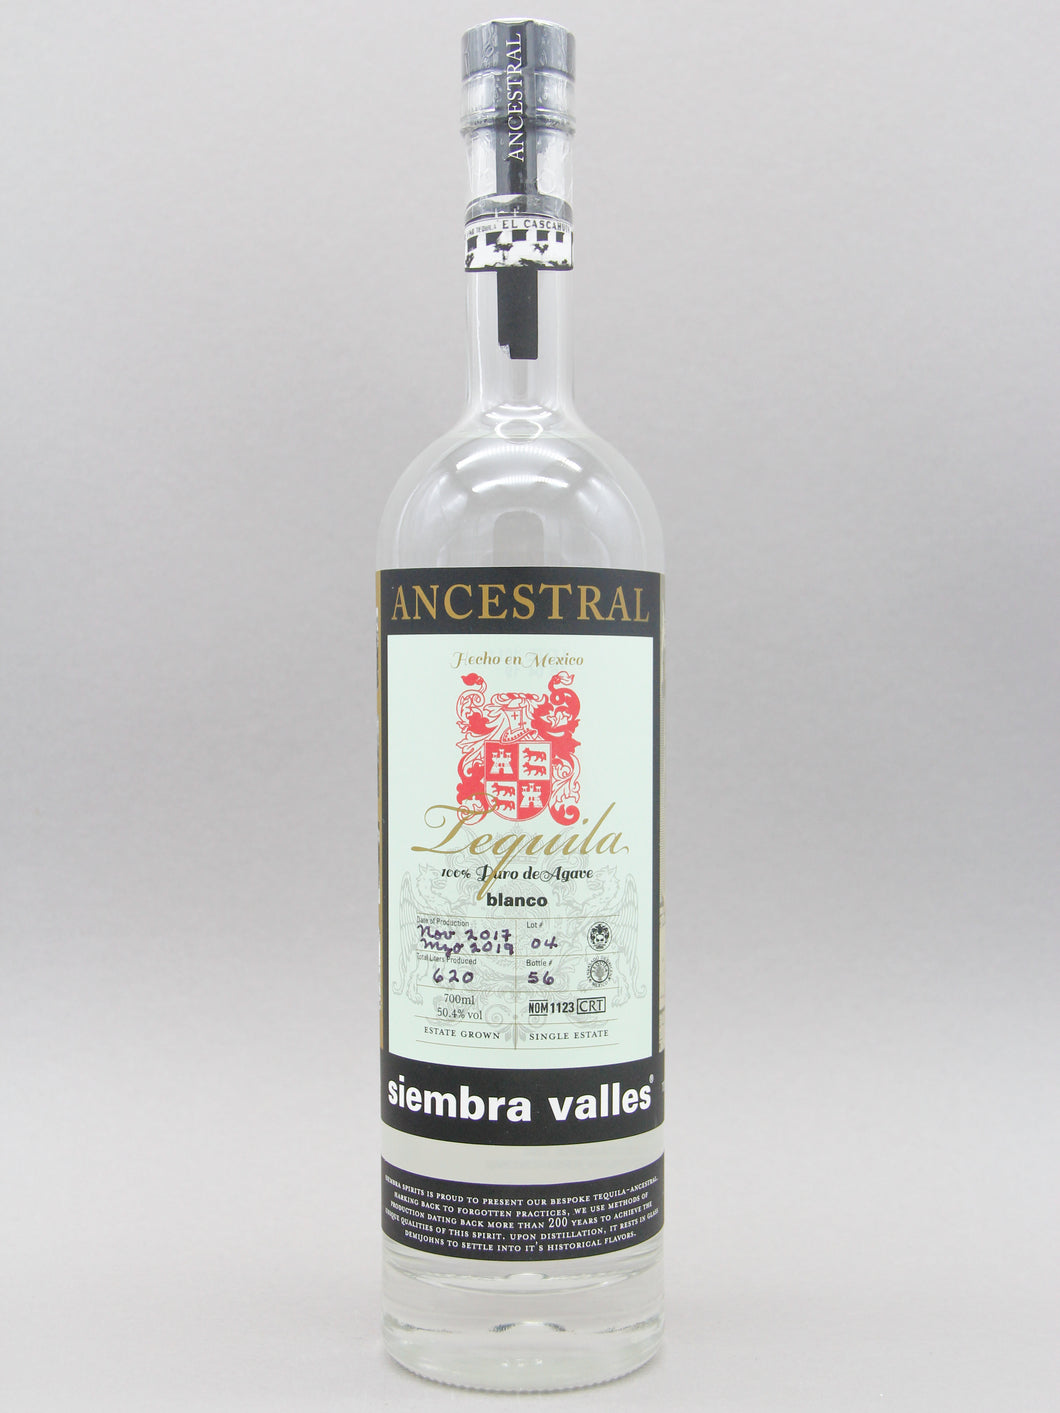 Siembra Valles, Ancestral Tequila Blanco, 100% Puro de Agave (50.4%, 70cl)